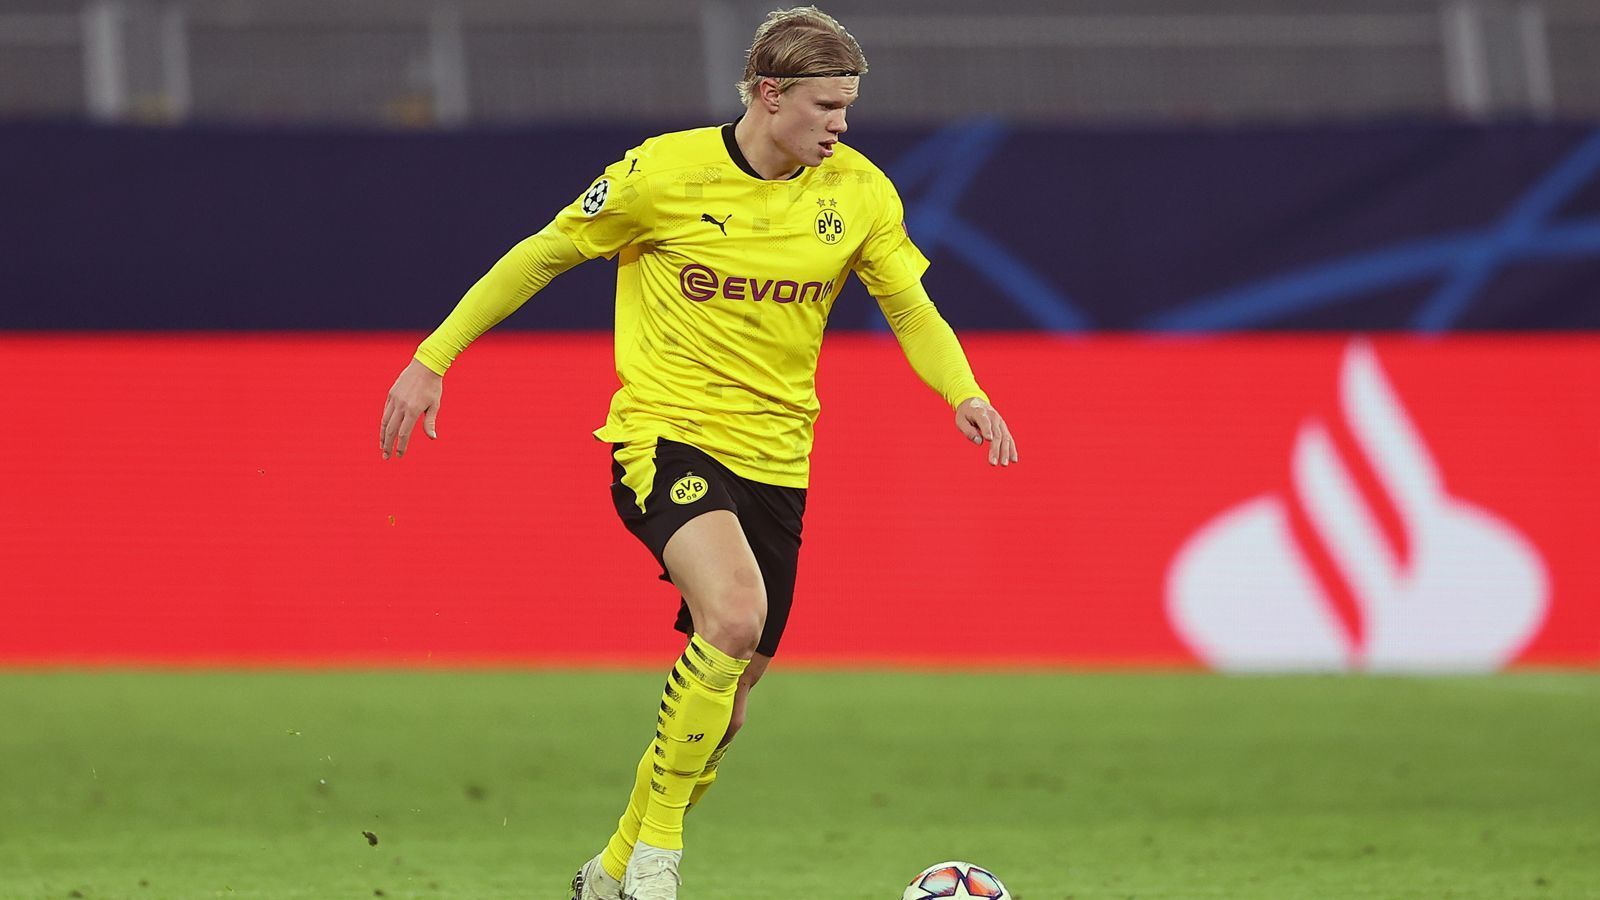 
                <strong>Erling Haaland (Borussia Dortmund)</strong><br>
                Position: Angriff - Alter: 20 Jahre
              